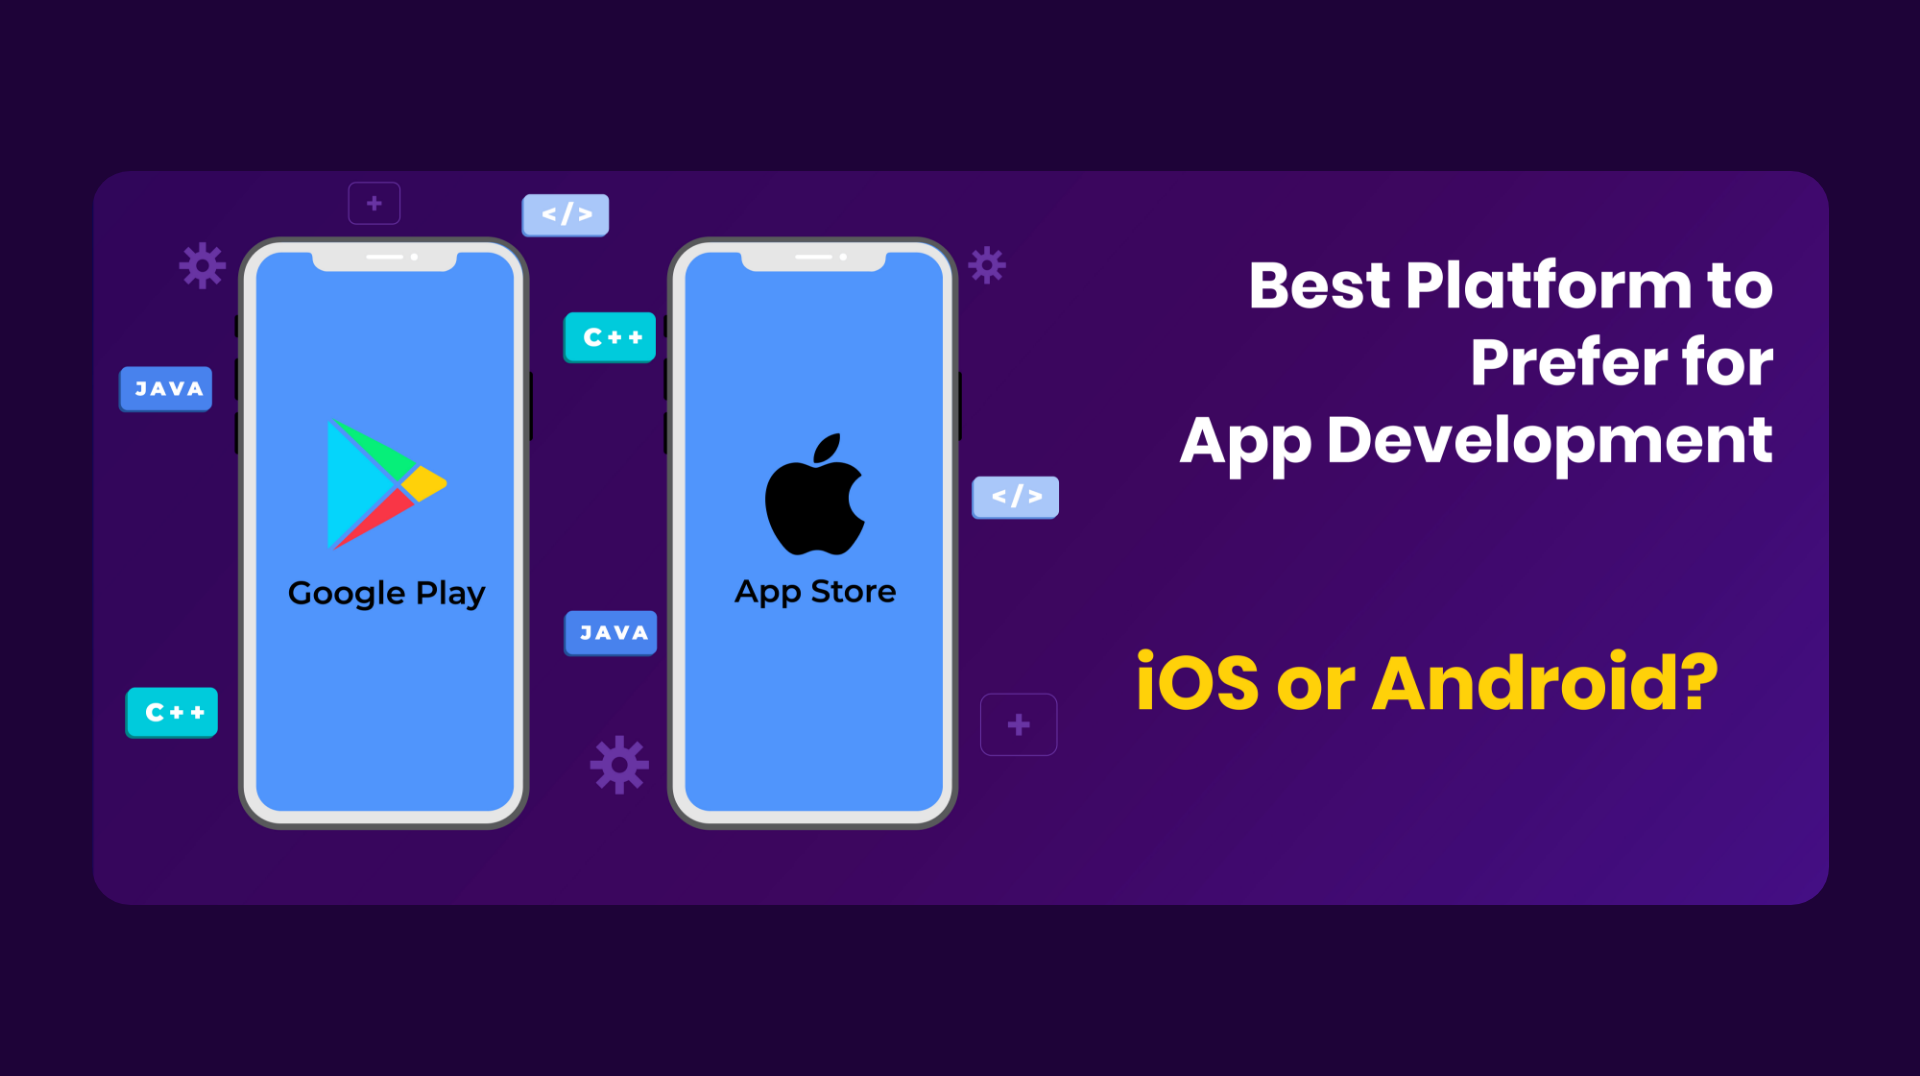 Best Platform to Prefer for App Development – iOS or Android?